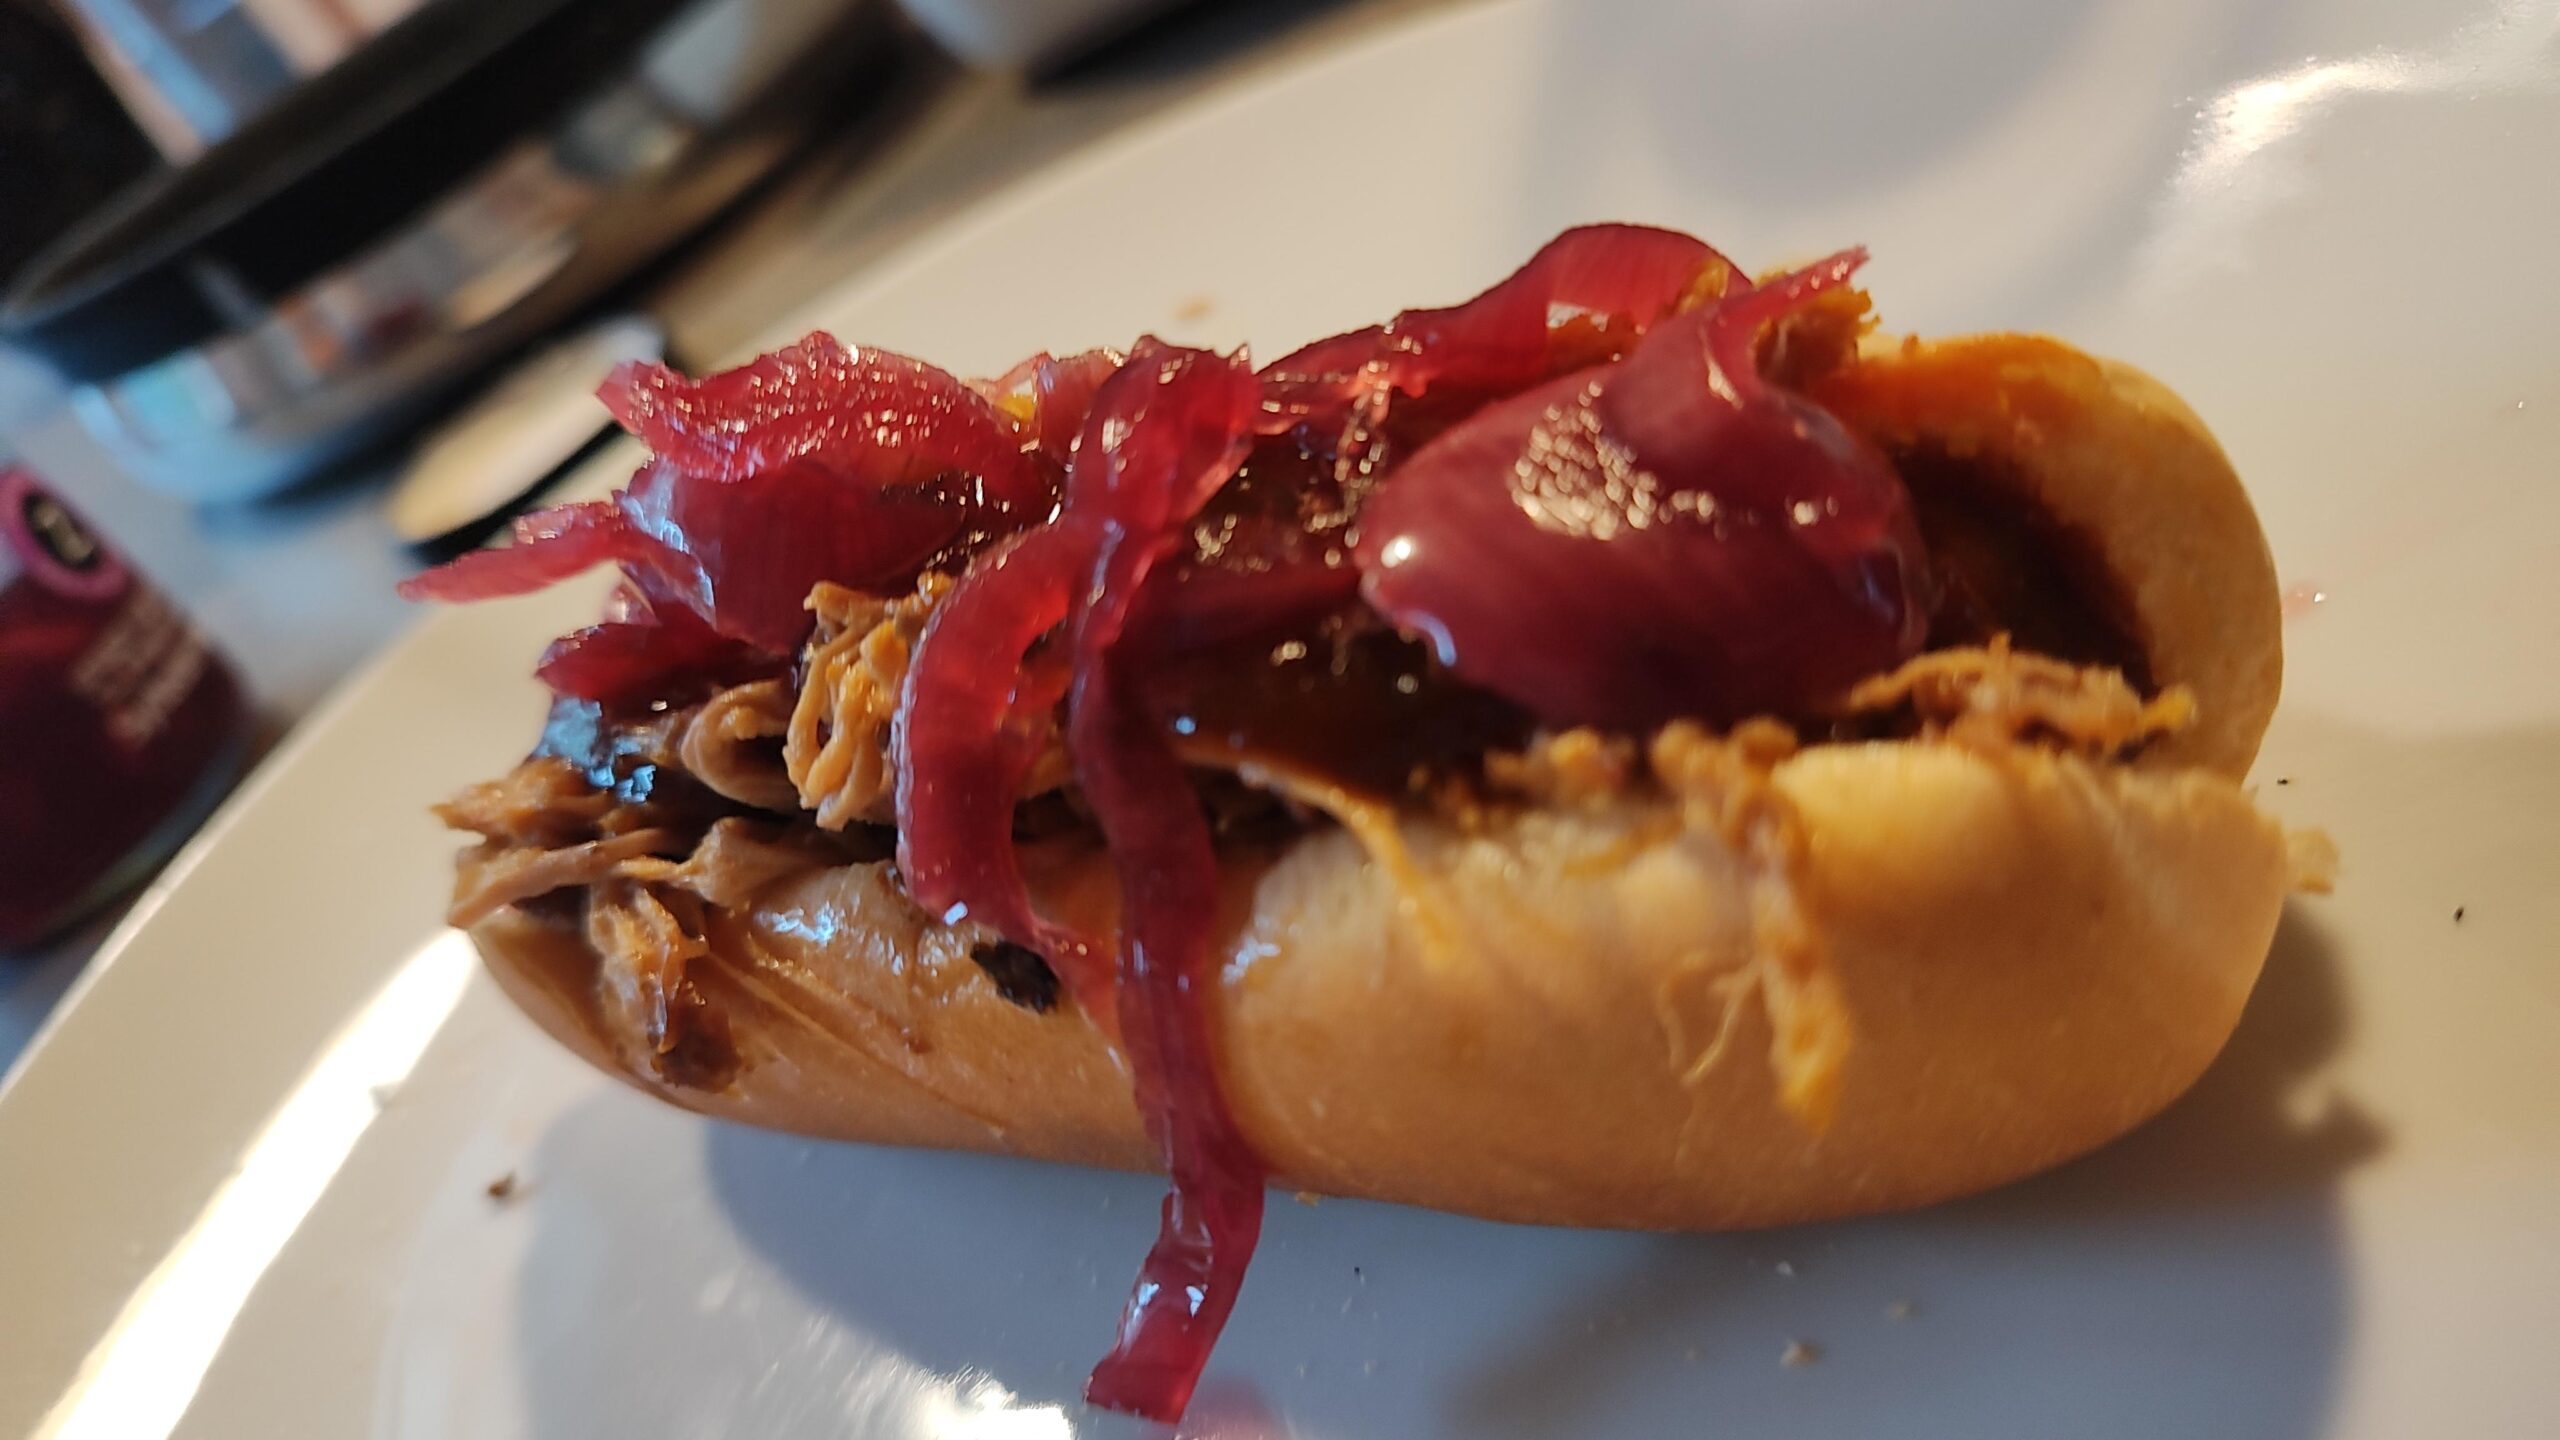 Pulled pork dog with barbecue sauce and picked pink onions